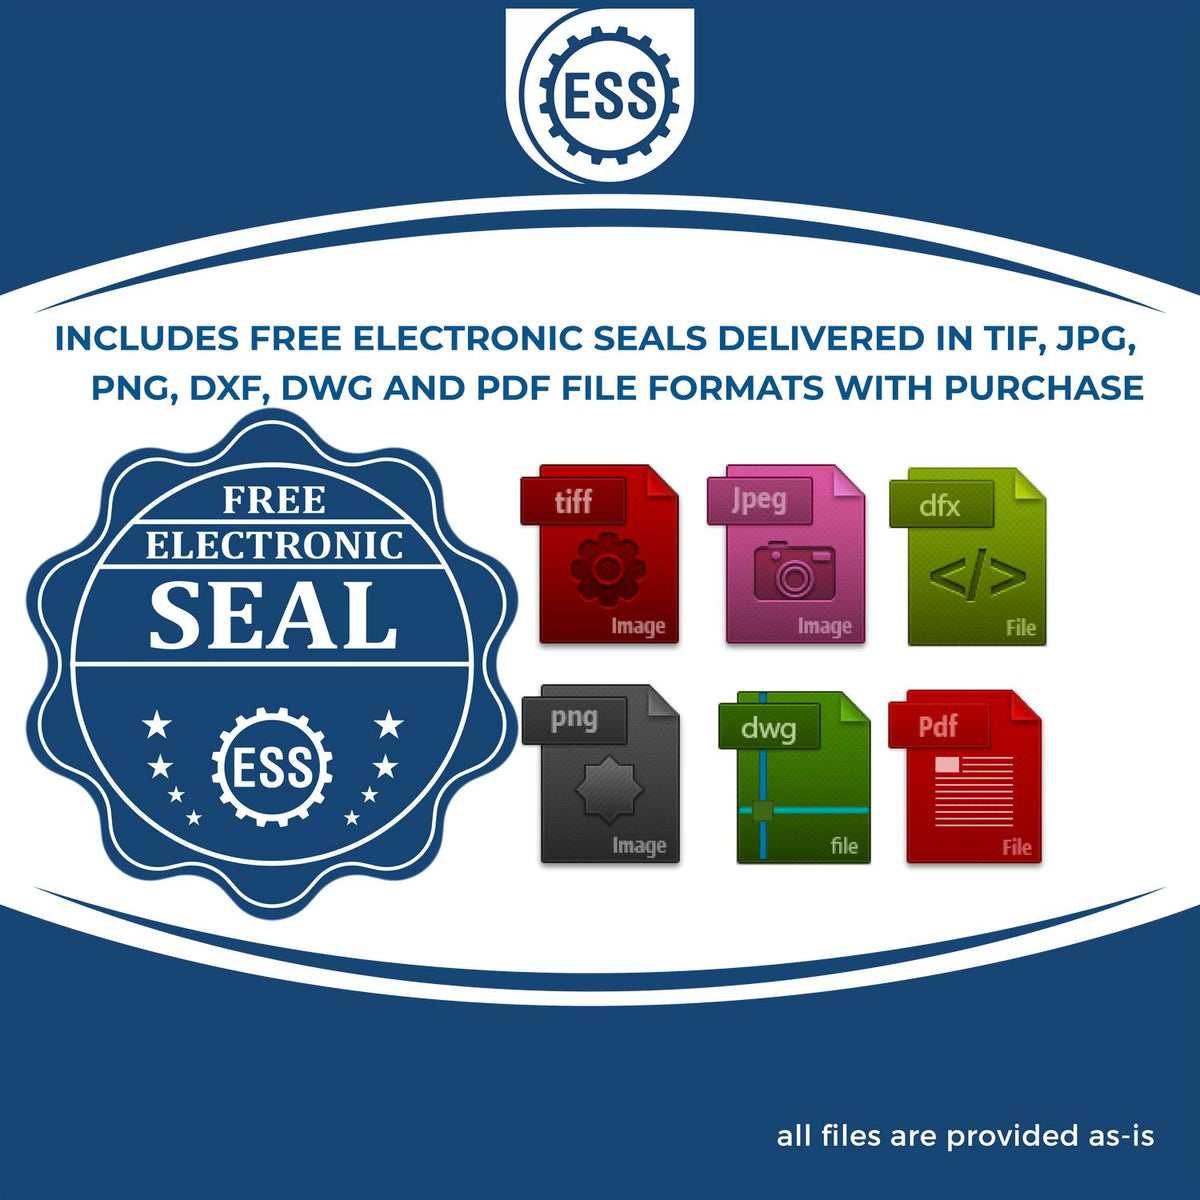 An infographic for the free electronic seal for the Gift Louisiana Engineer Seal illustrating the different file type icons such as DXF, DWG, TIF, JPG and PNG.